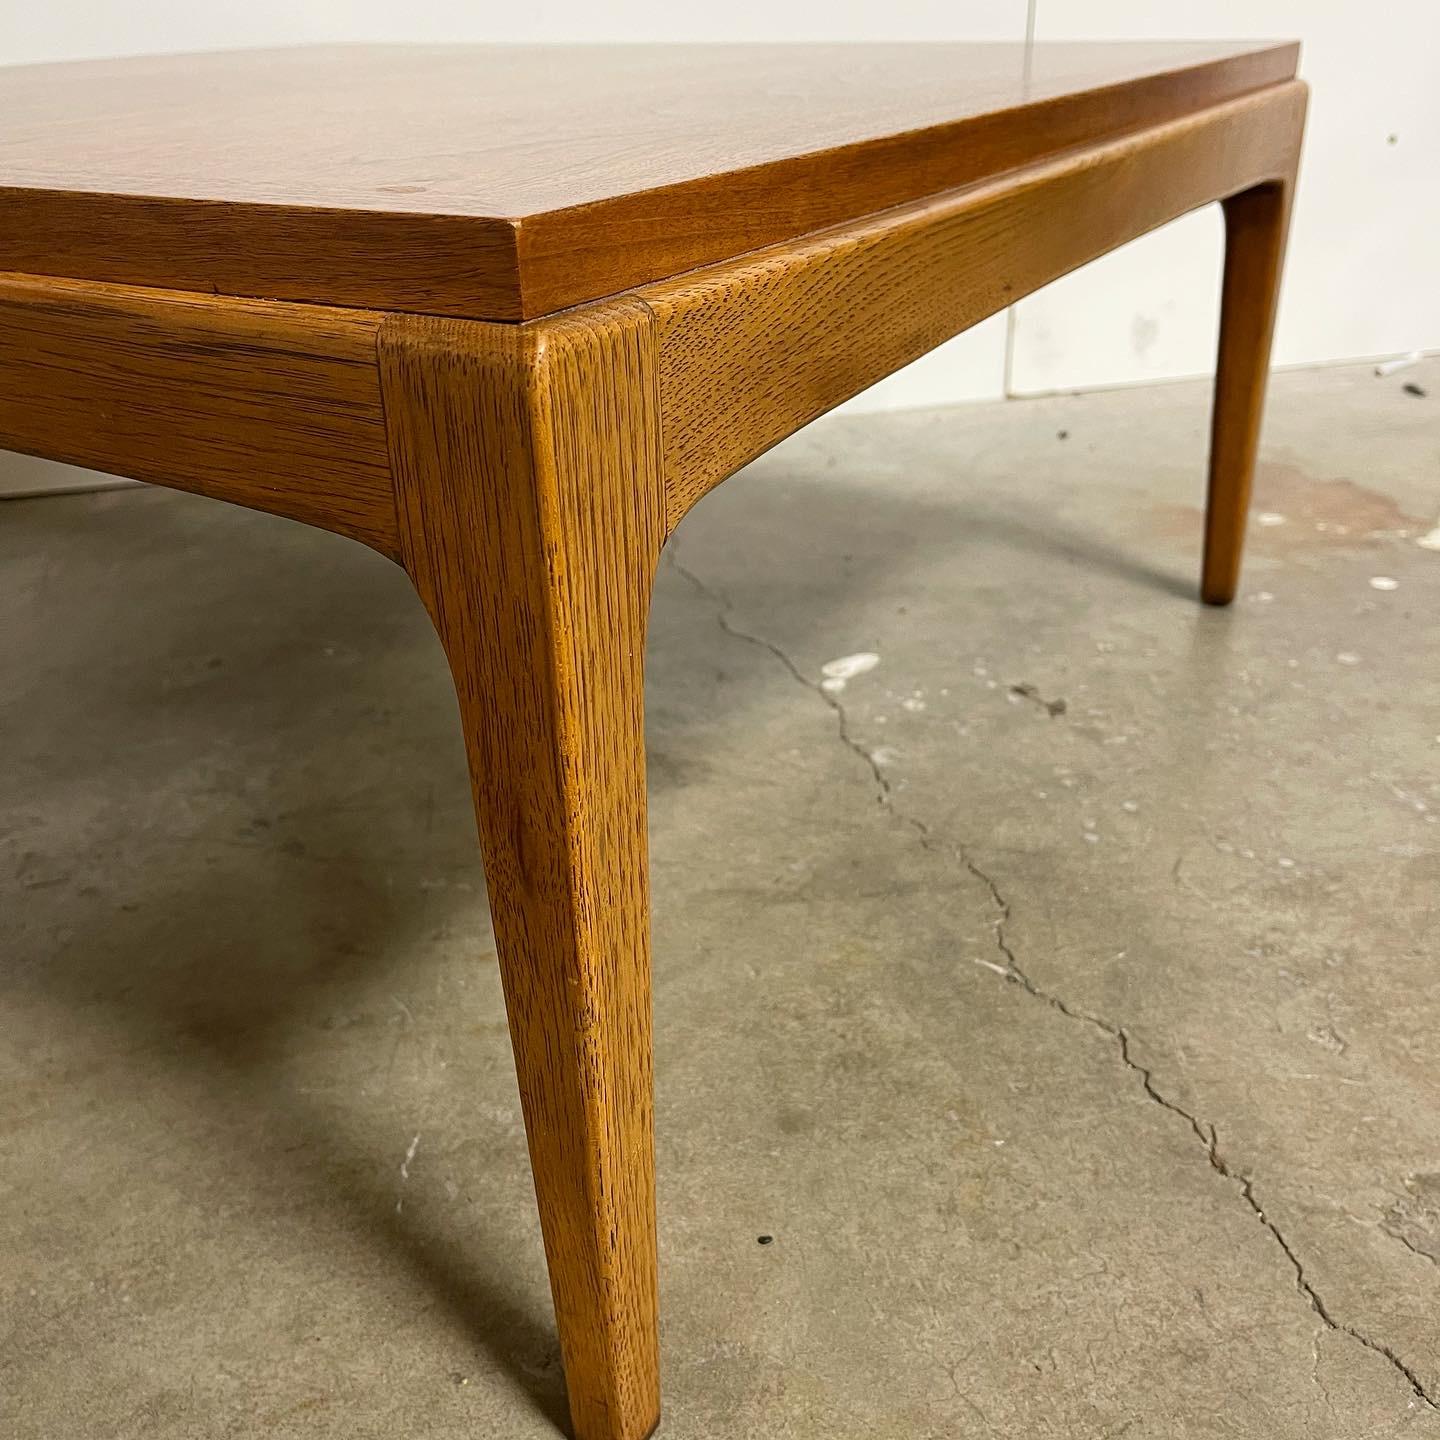 Shipping is included in the price of this item! 
Mid Century Square coffee table by Lane. Out of their Rhythm line. Incredible condition table. Original owner and very well taken care of! Walnut build and sturdy. Ready for all your cocktails and